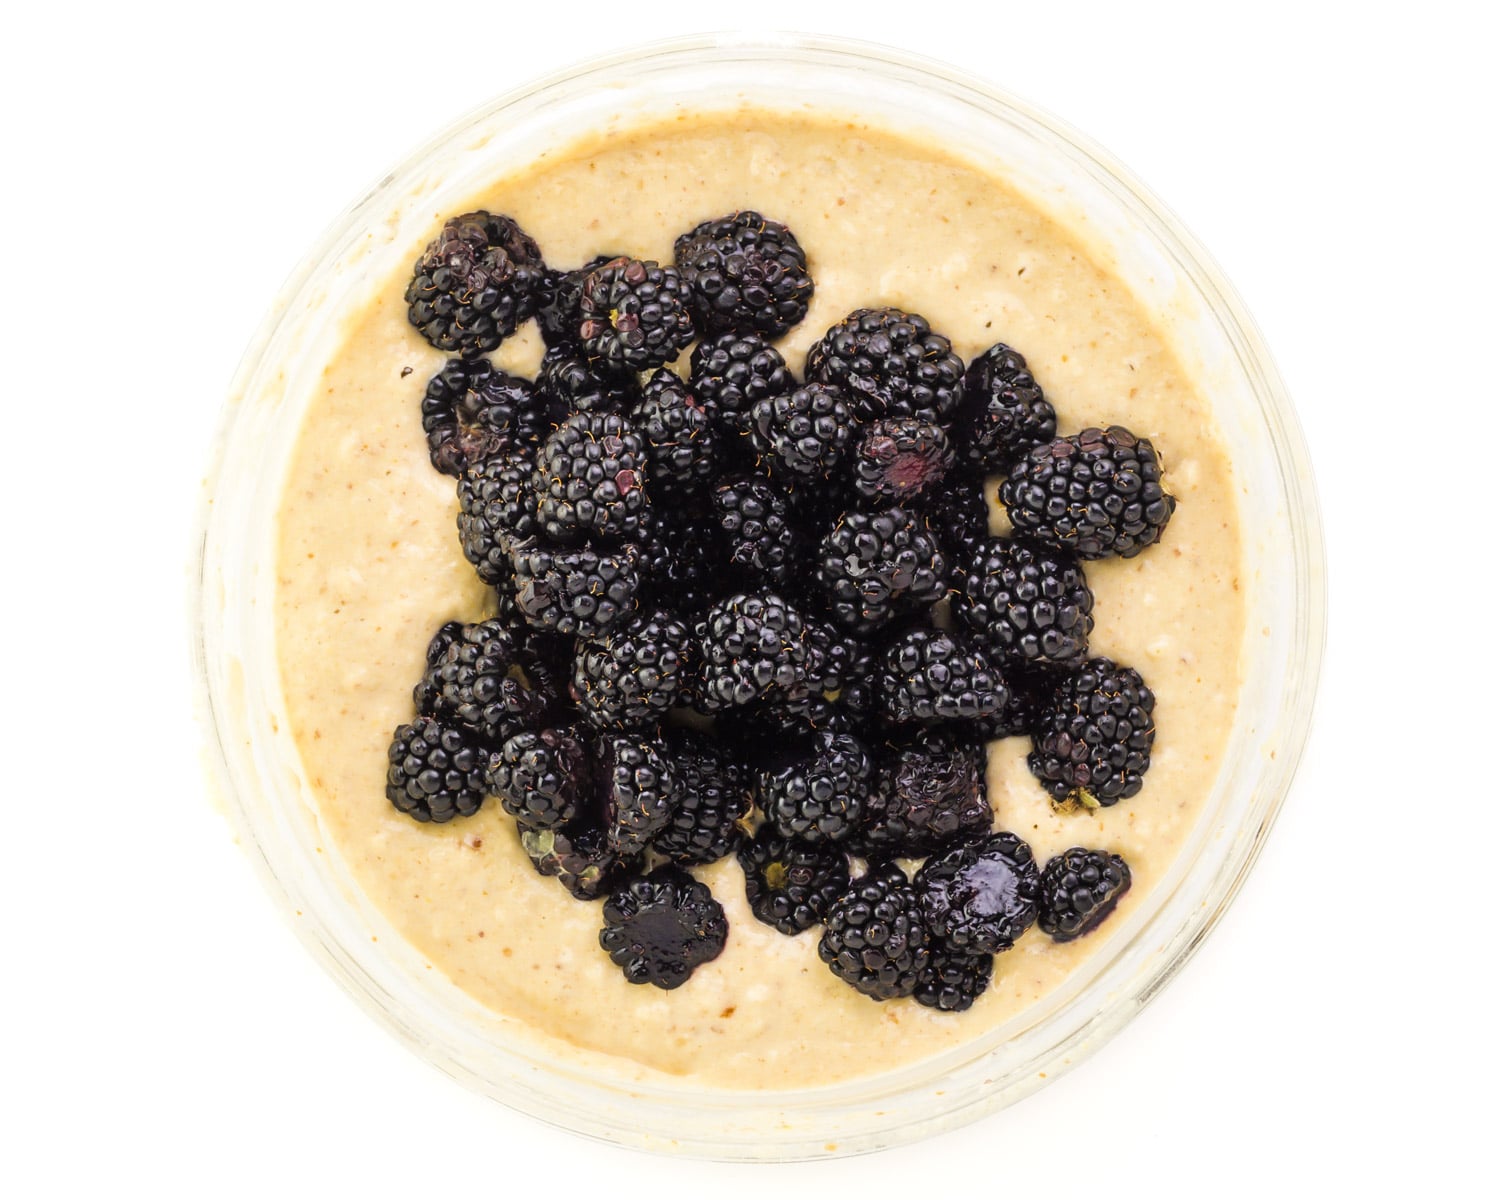 Looking down on a bowl of muffin batter with fresh blackberries on top.